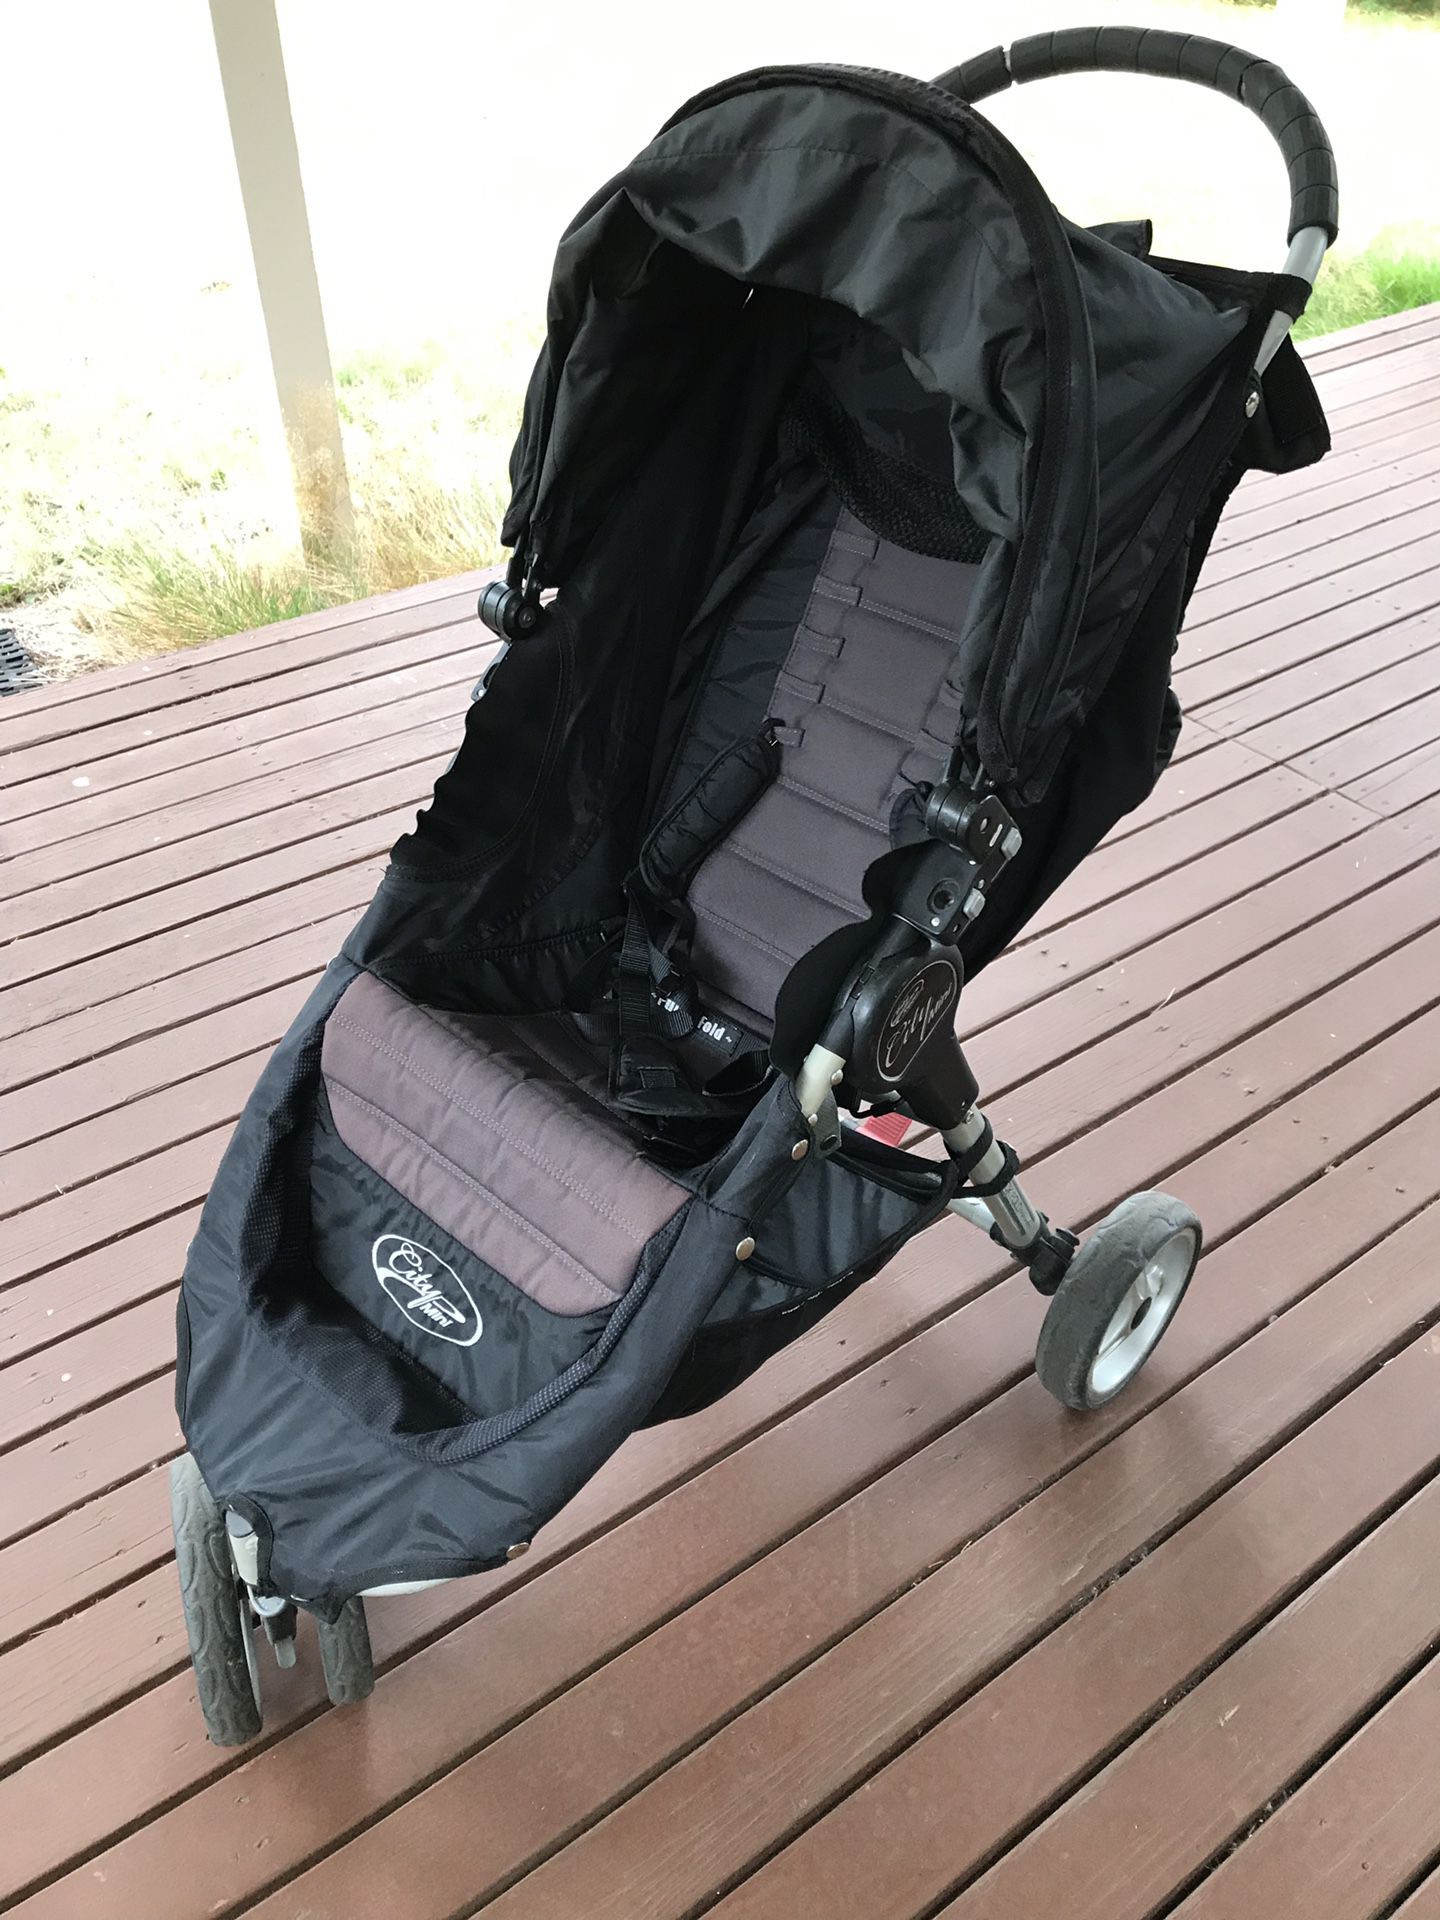 Baby Jogger City Mini stroller with glider board